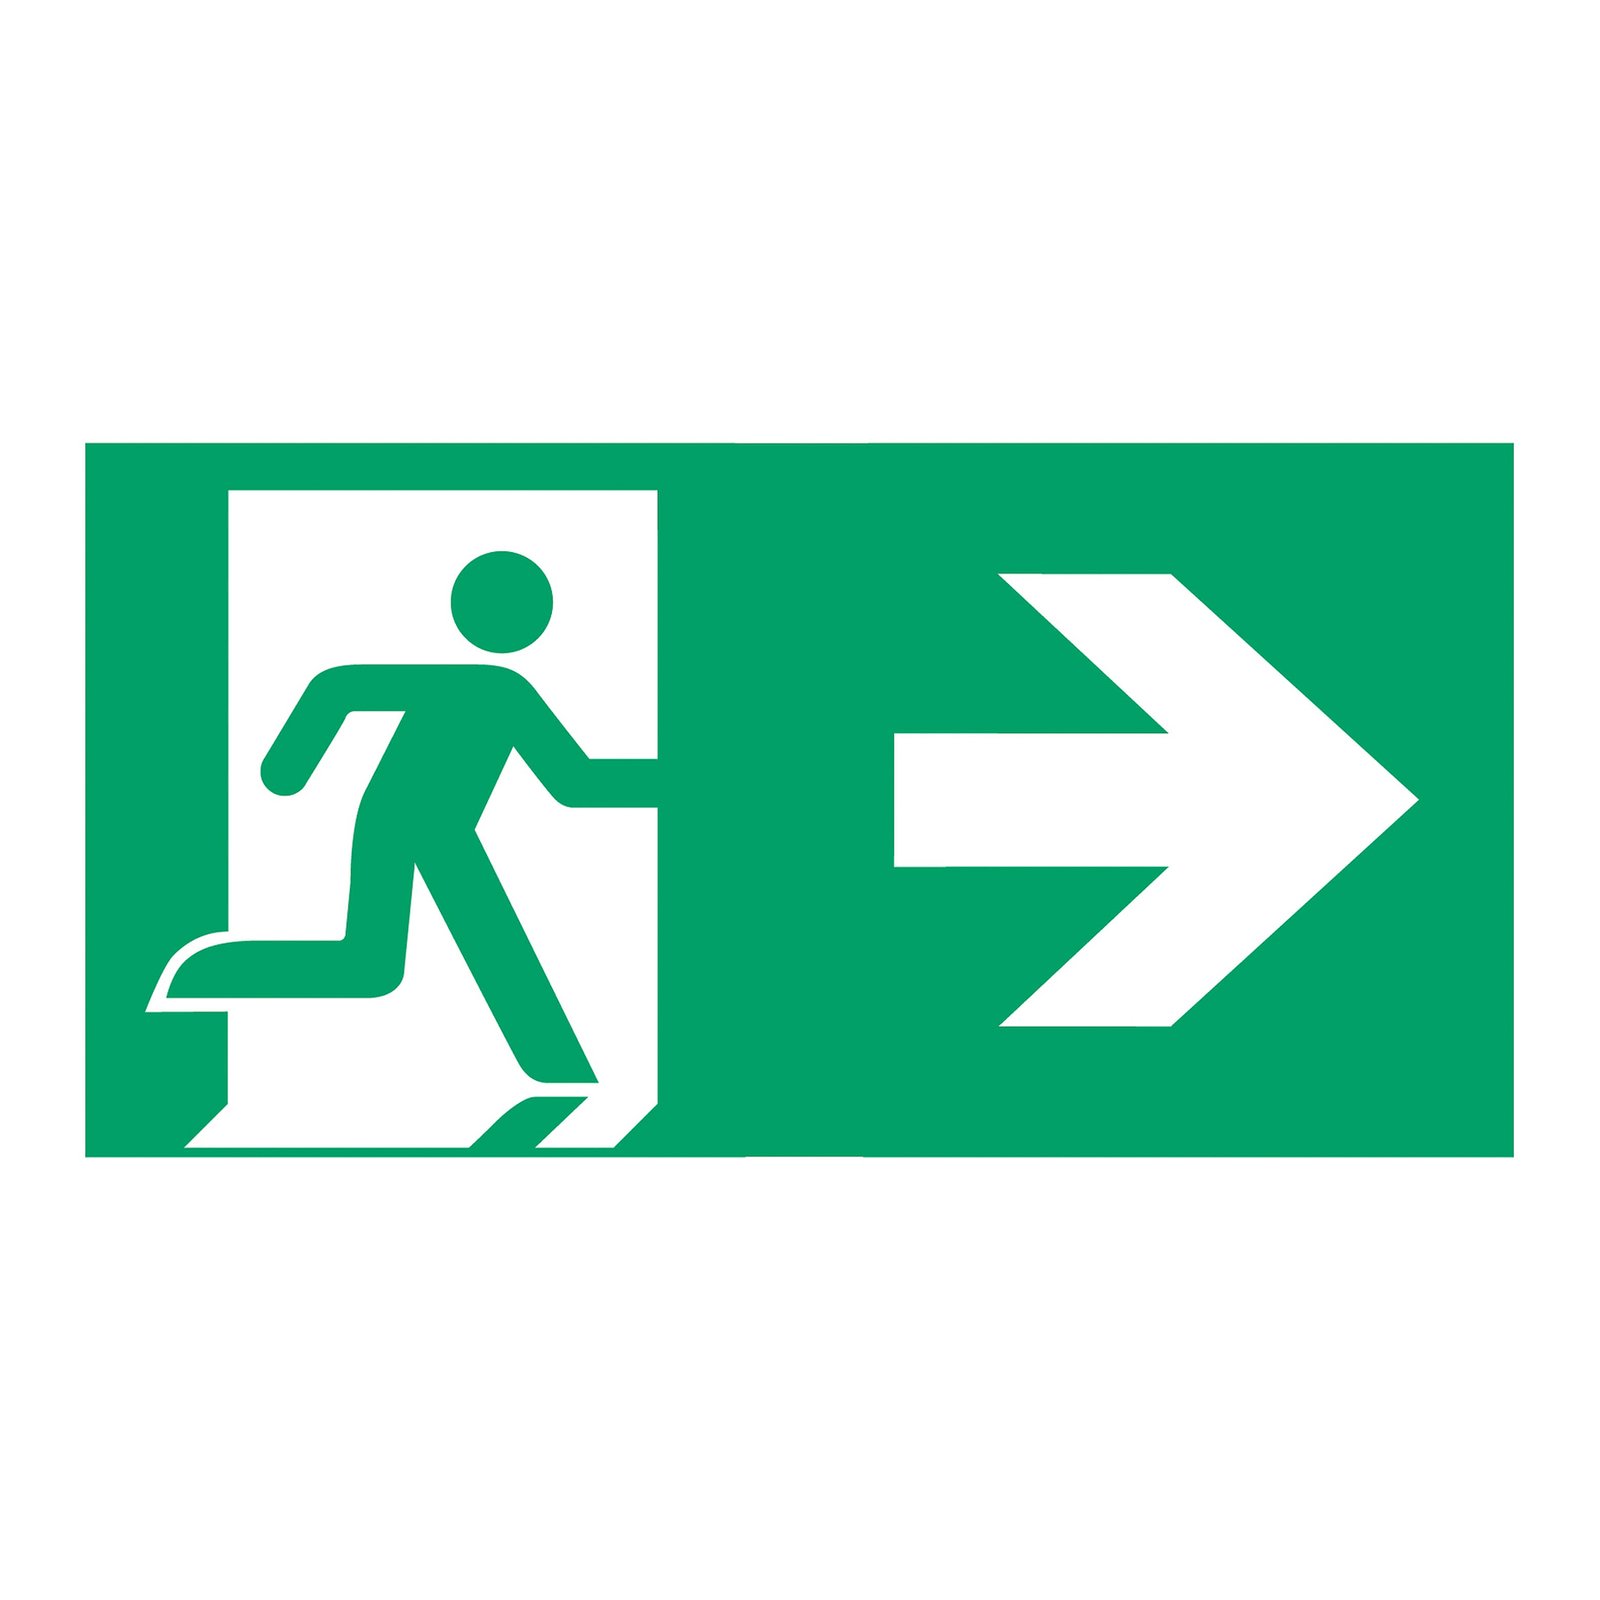 Type B escape route sign for L-LUX Standard Eco